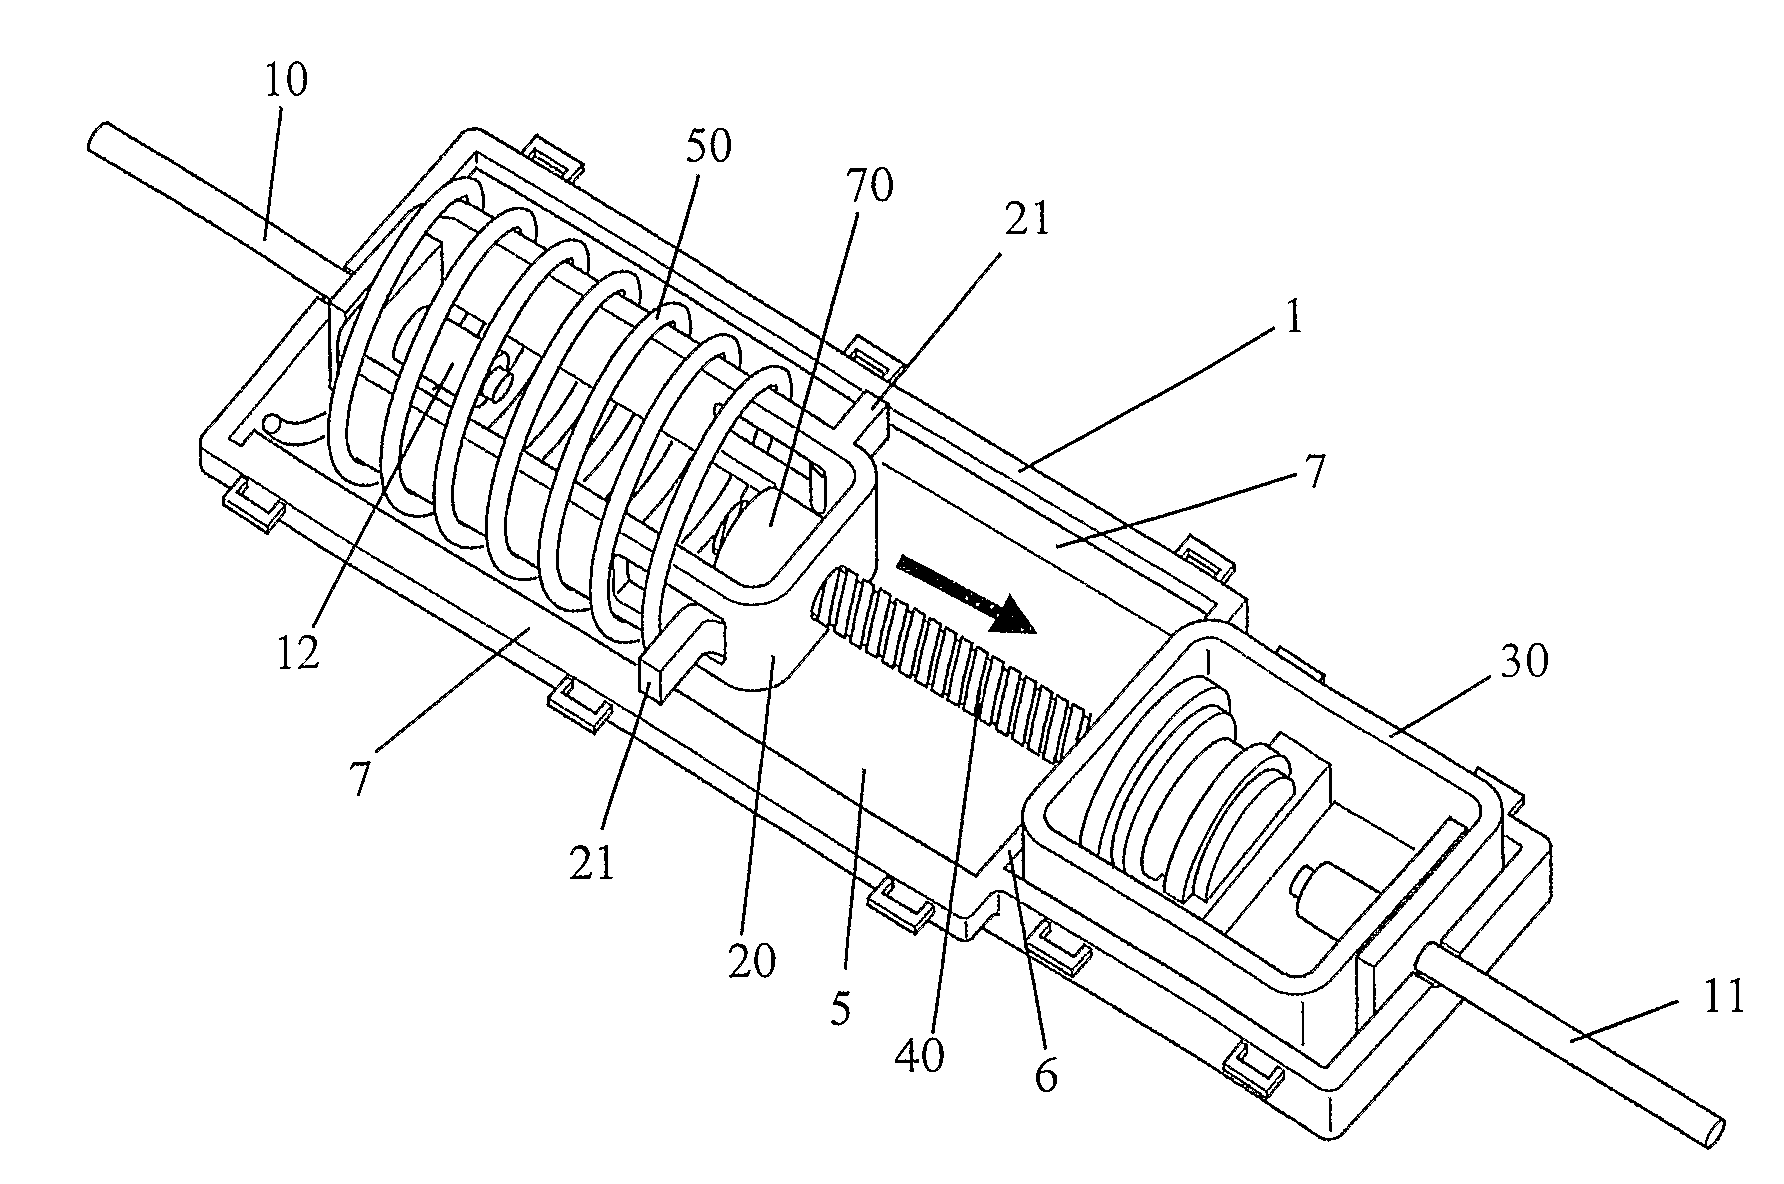 Device for Adjusting the Tension of a Pulling Element